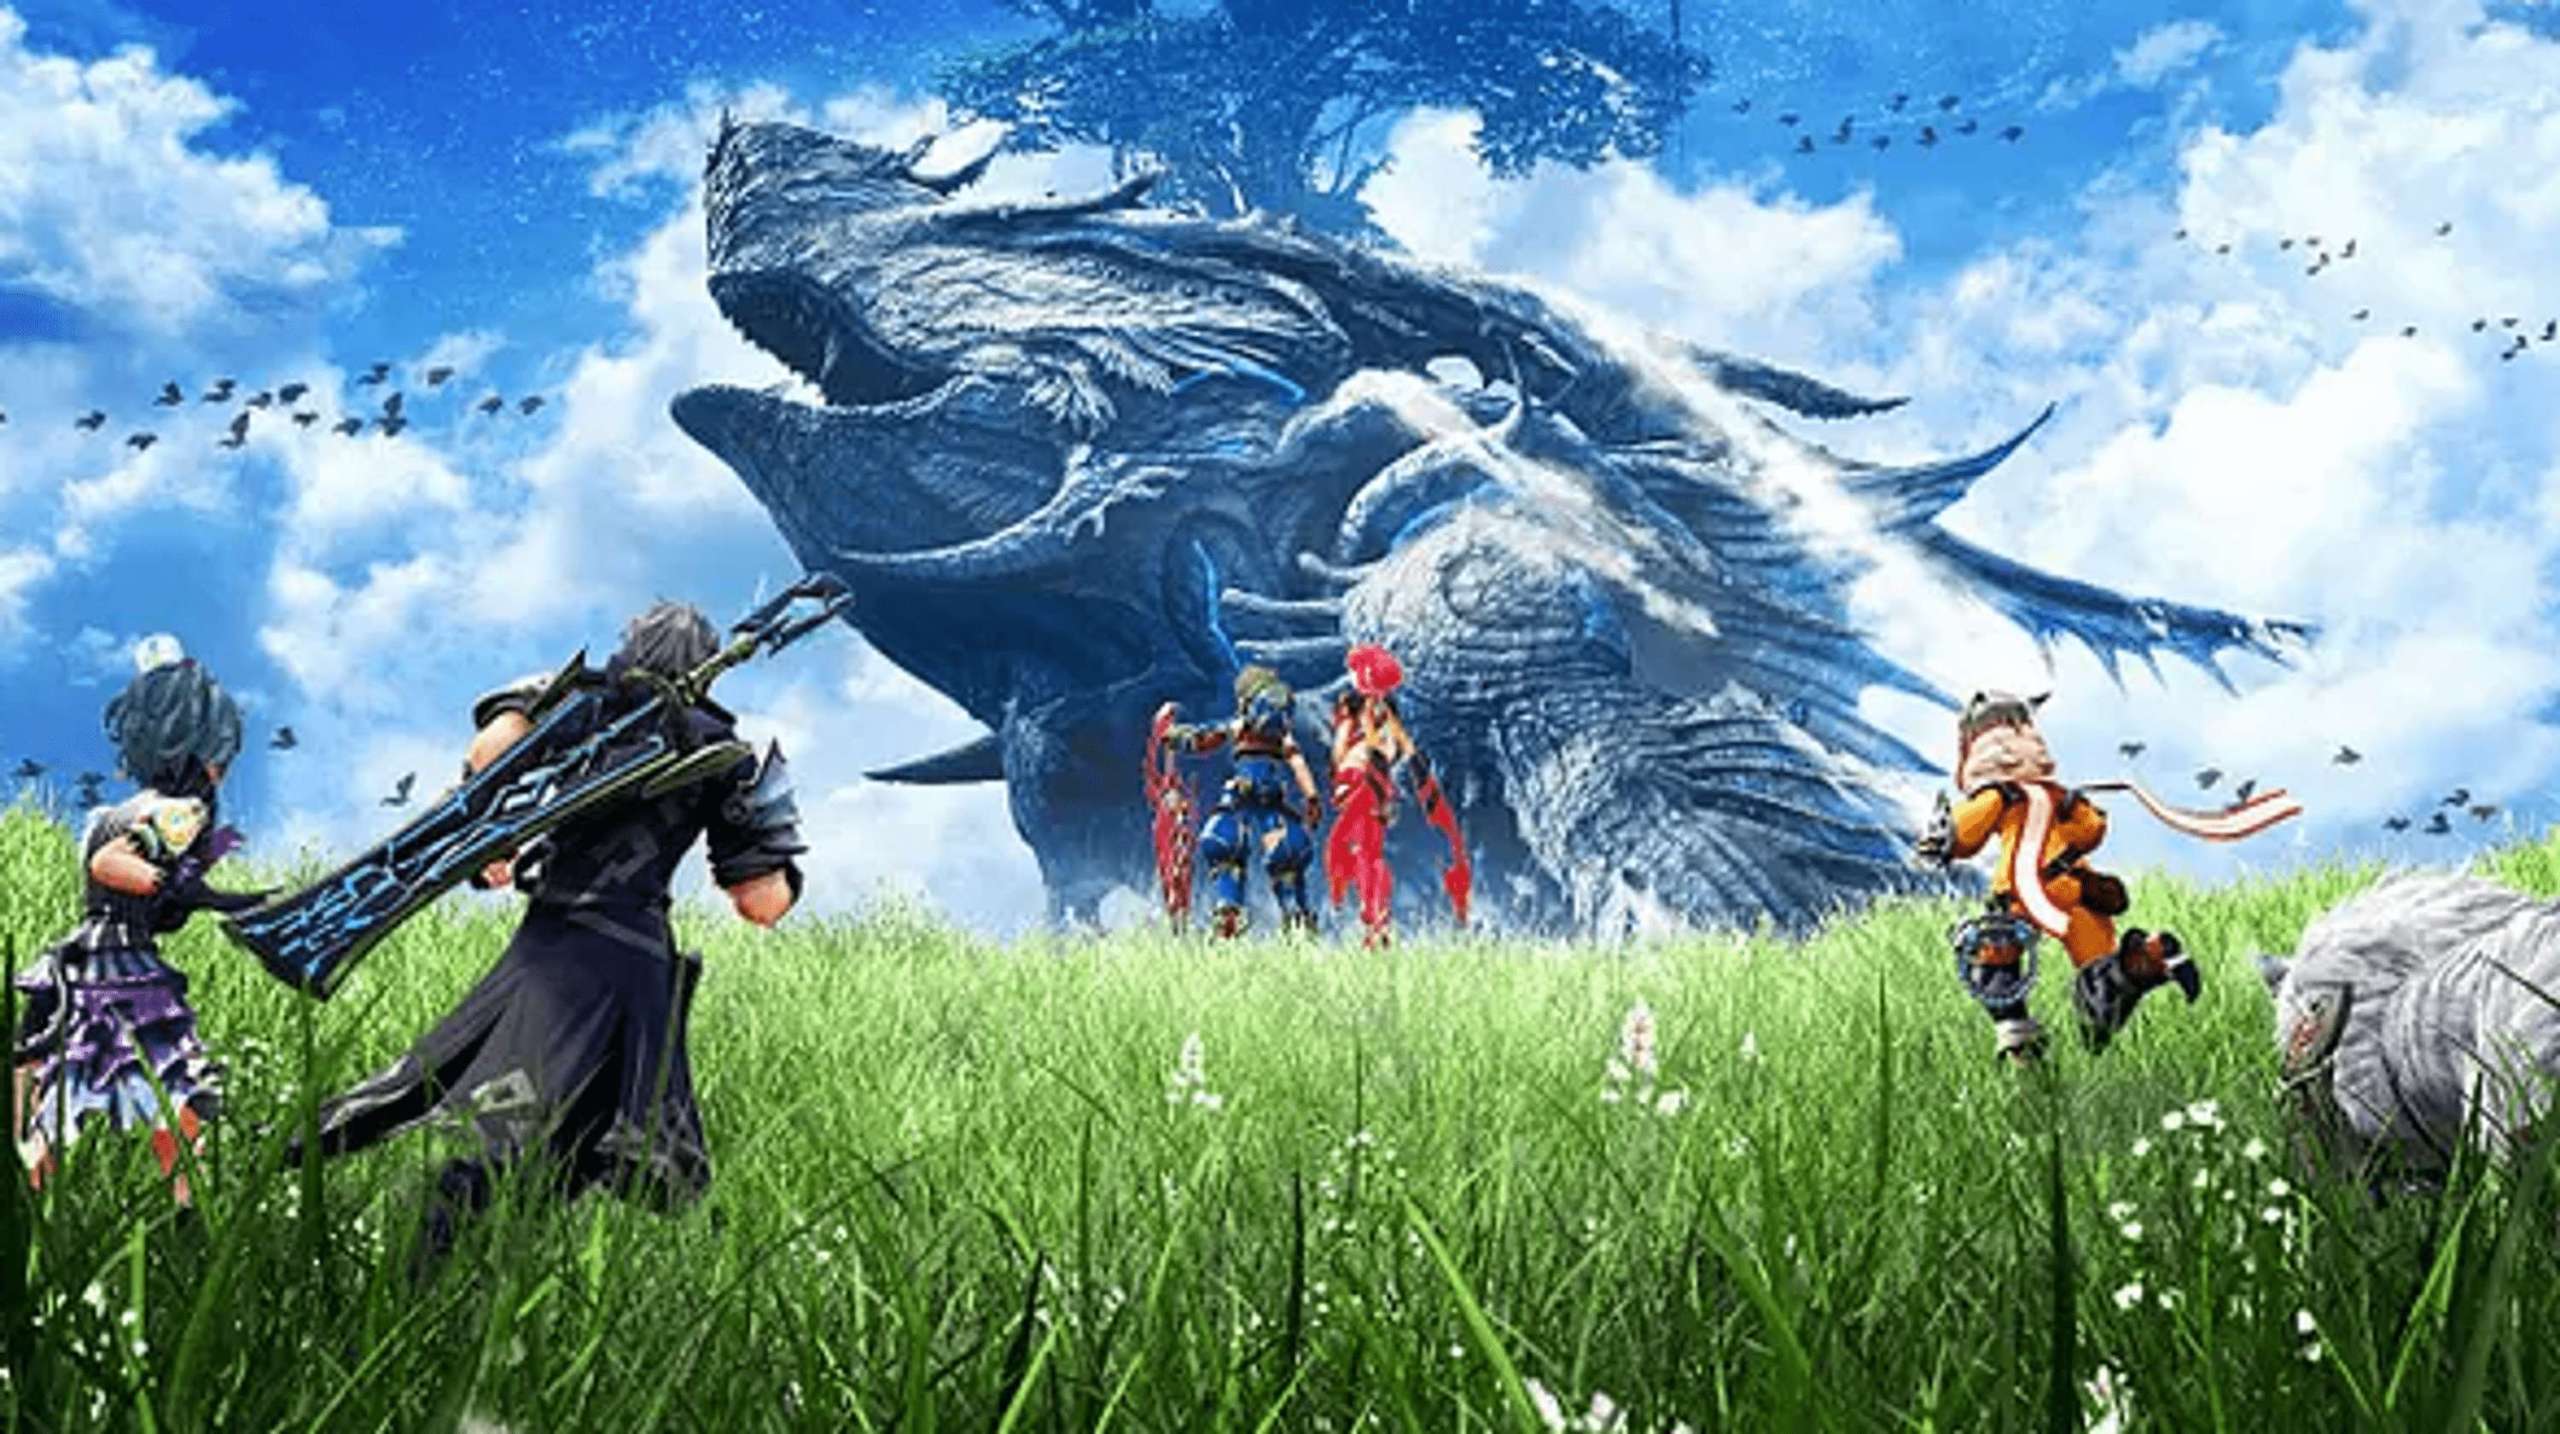 The Series’ Largest Physical Release In The UK Is Xenoblade Chronicles 3